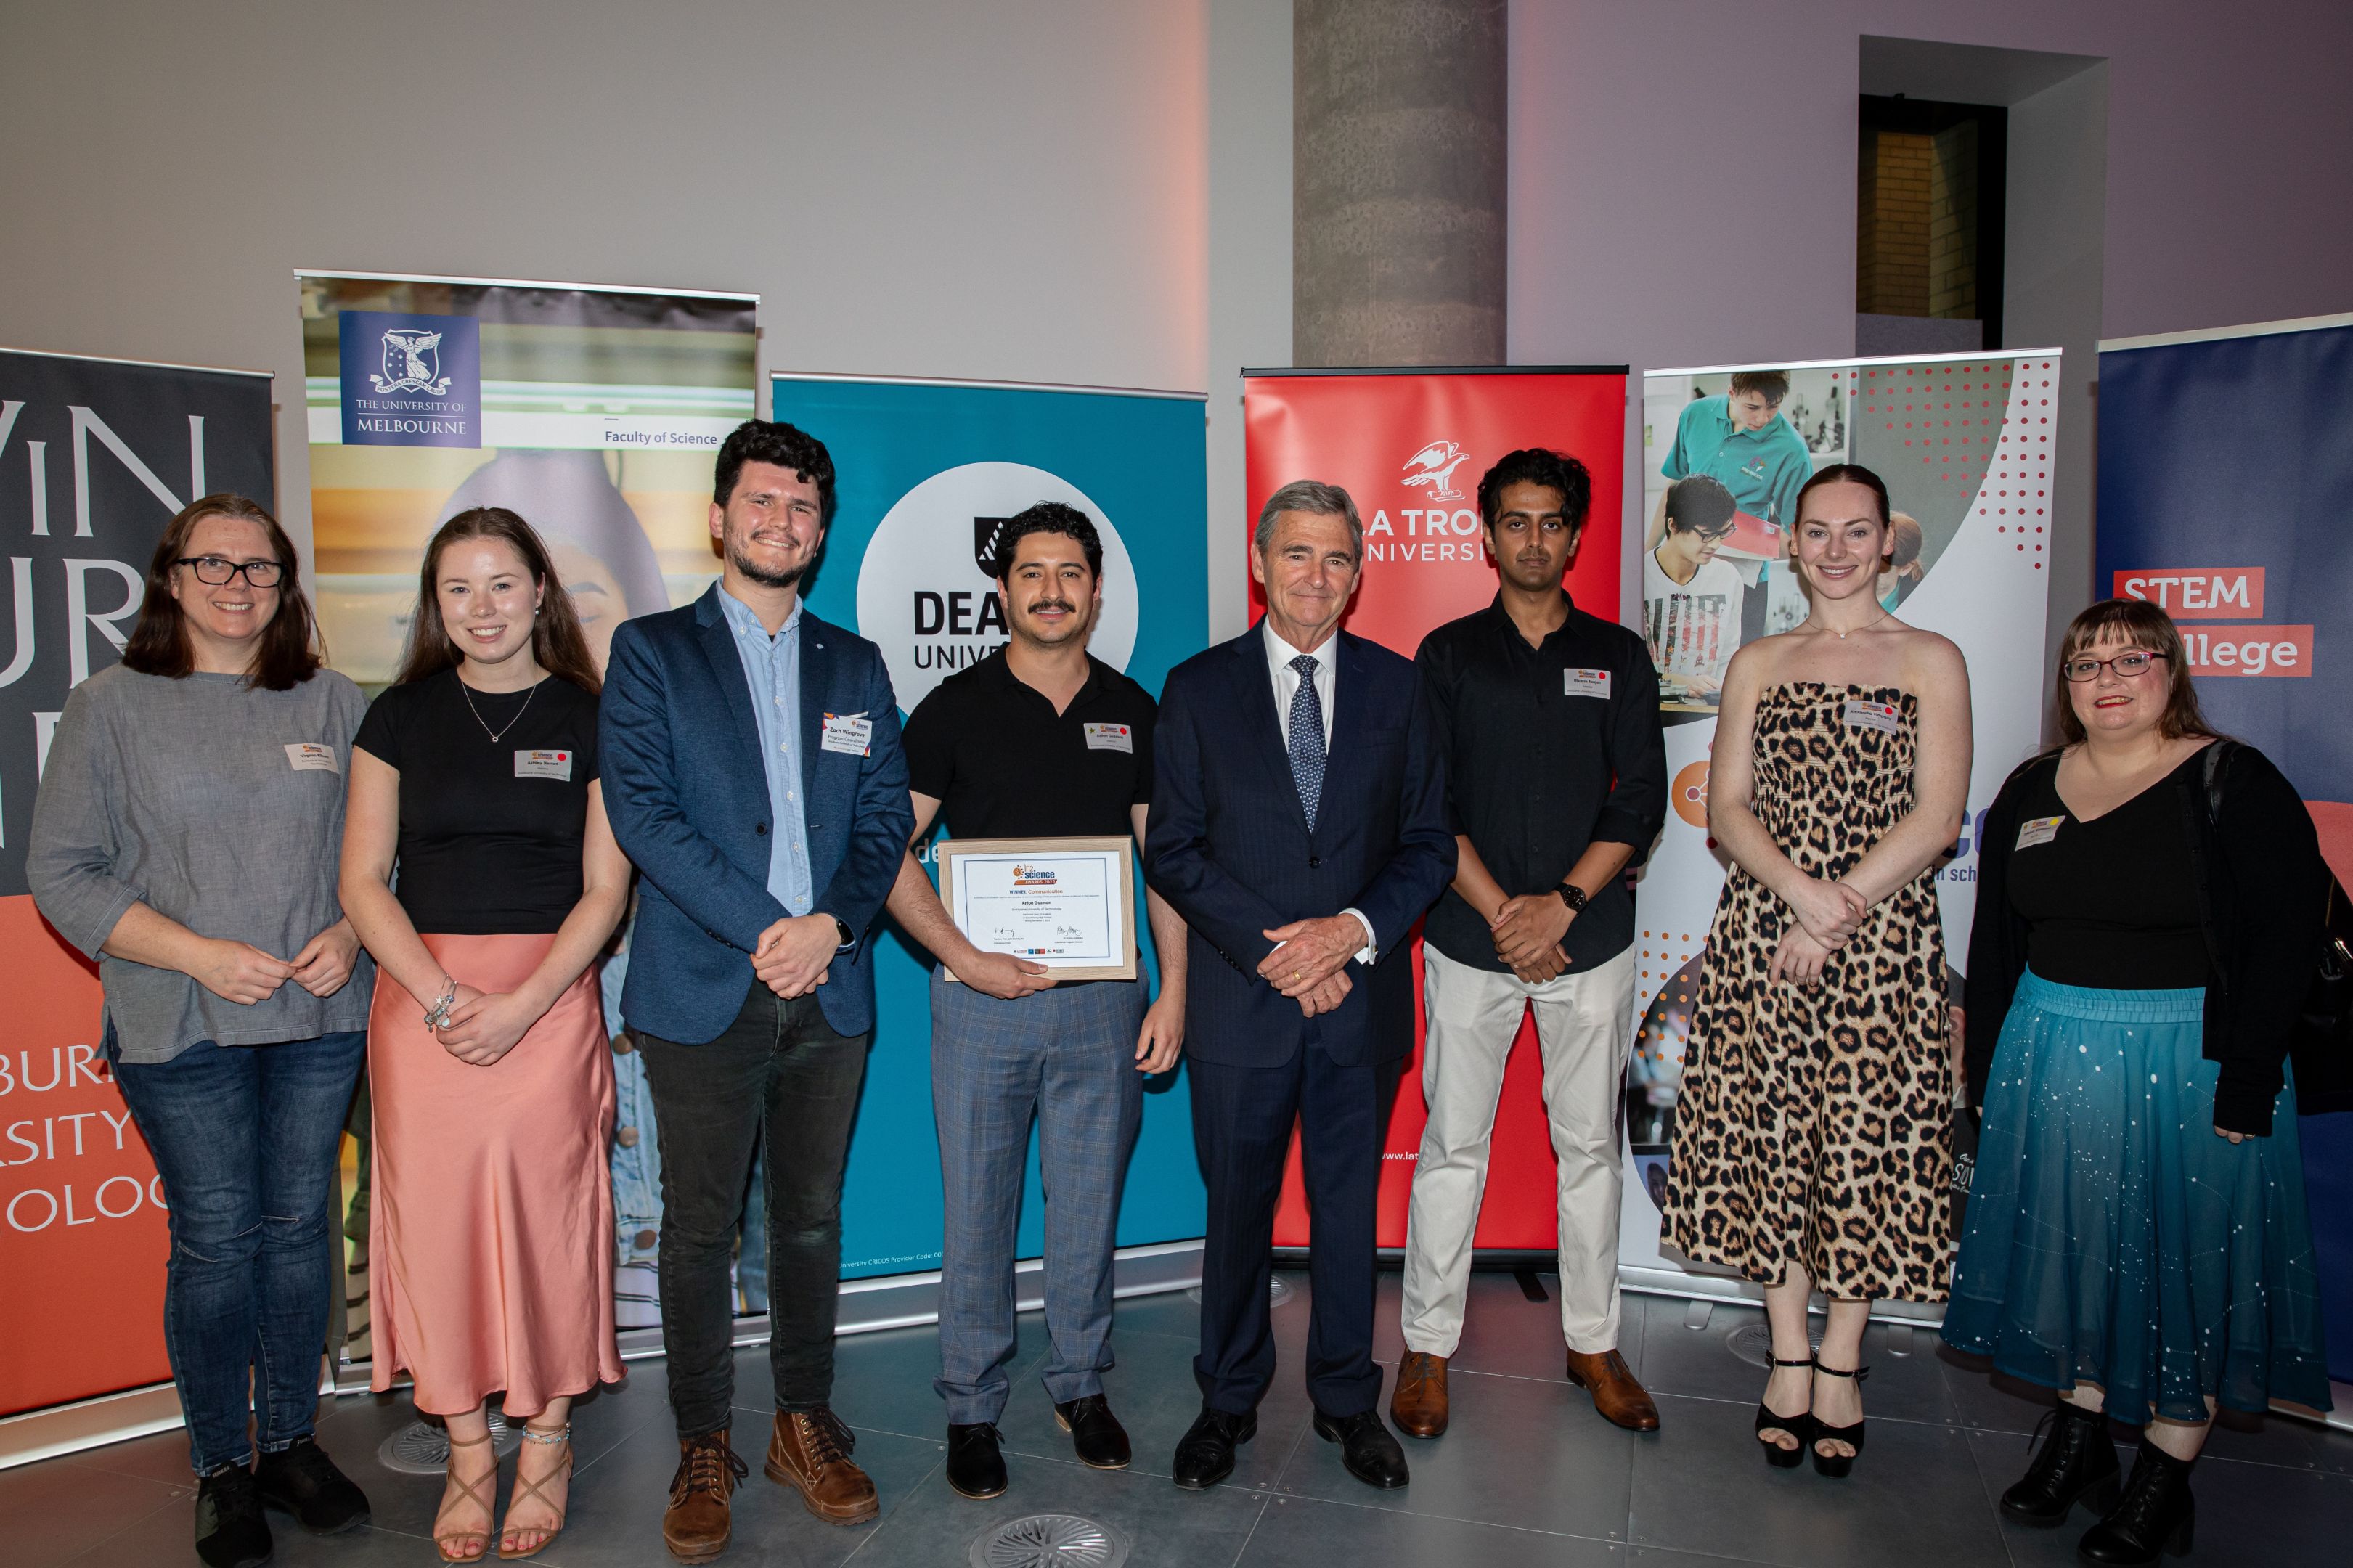 The Swinburne In2science team stand with the Hon John Brumby AO in front of various university branding